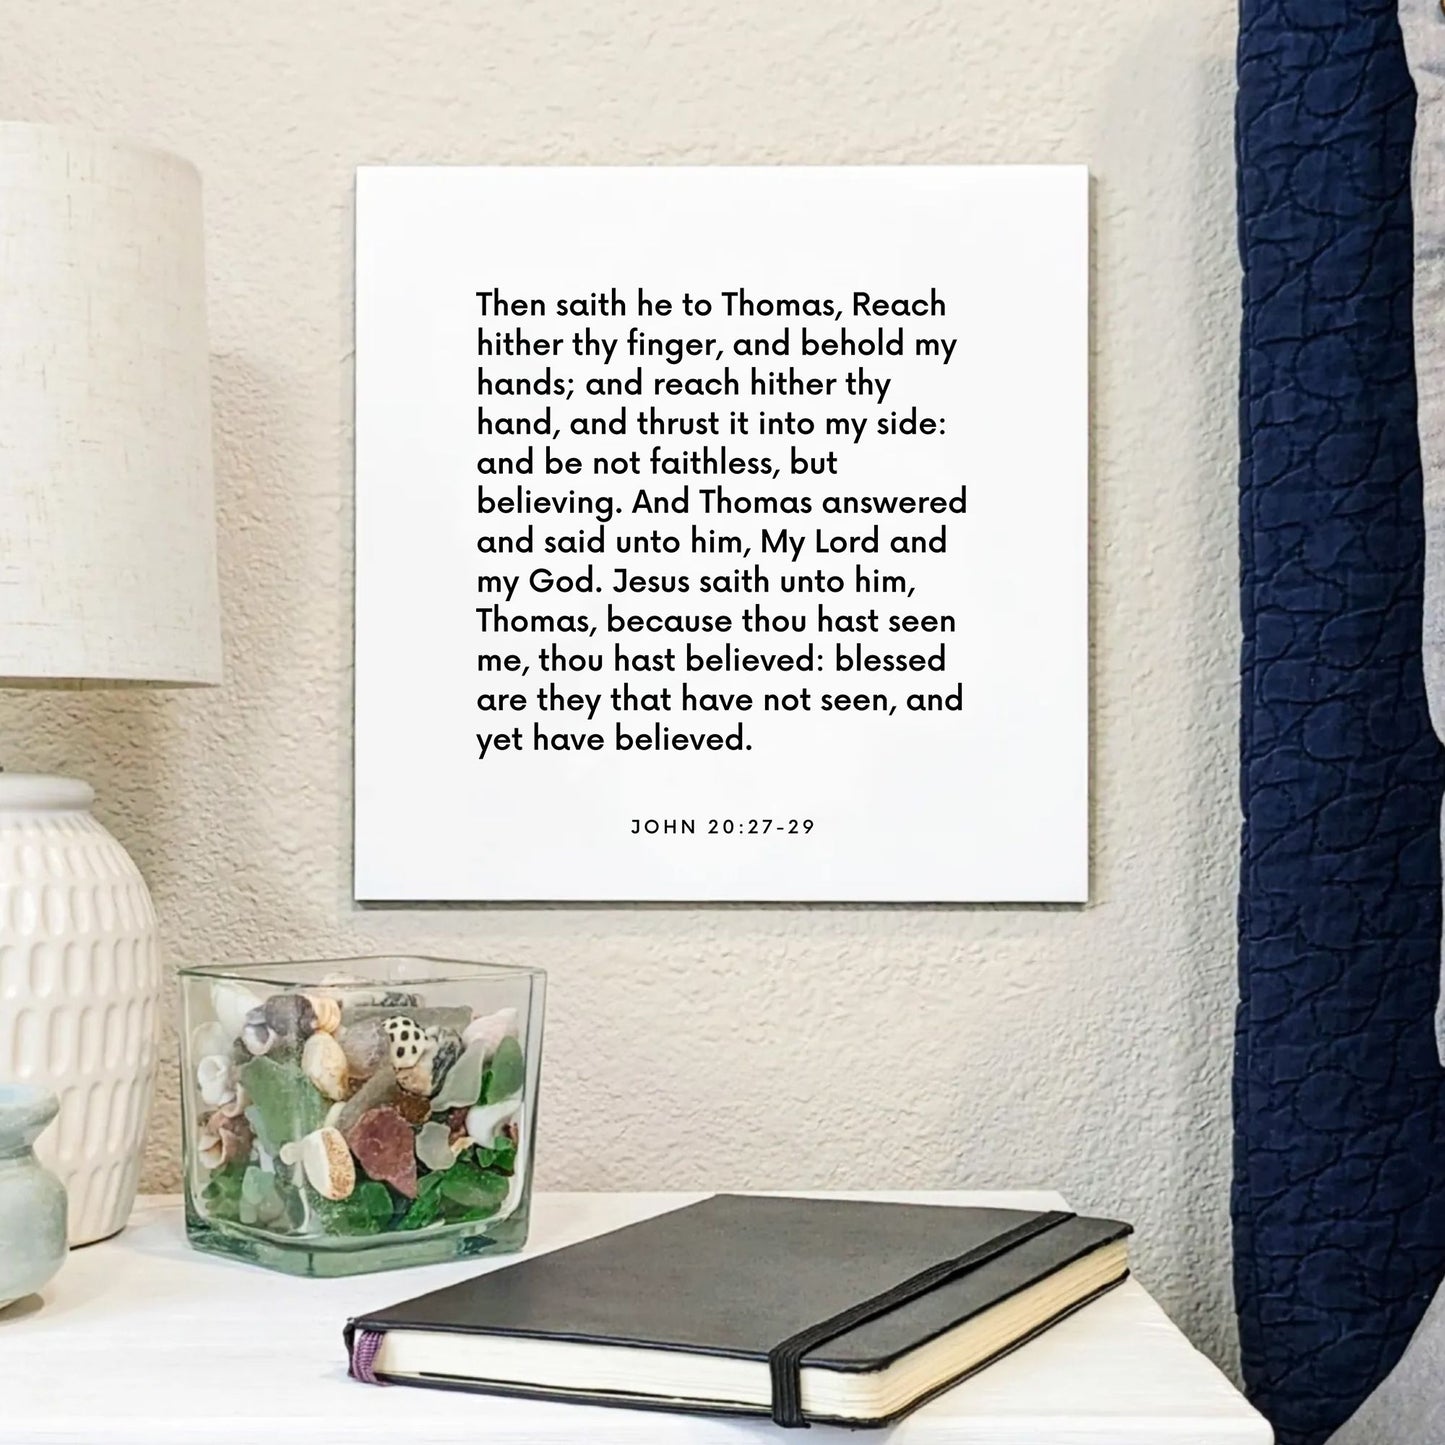 Bedside mouting of the scripture tile for John 20:27-29 - "Be not faithless, but believing"